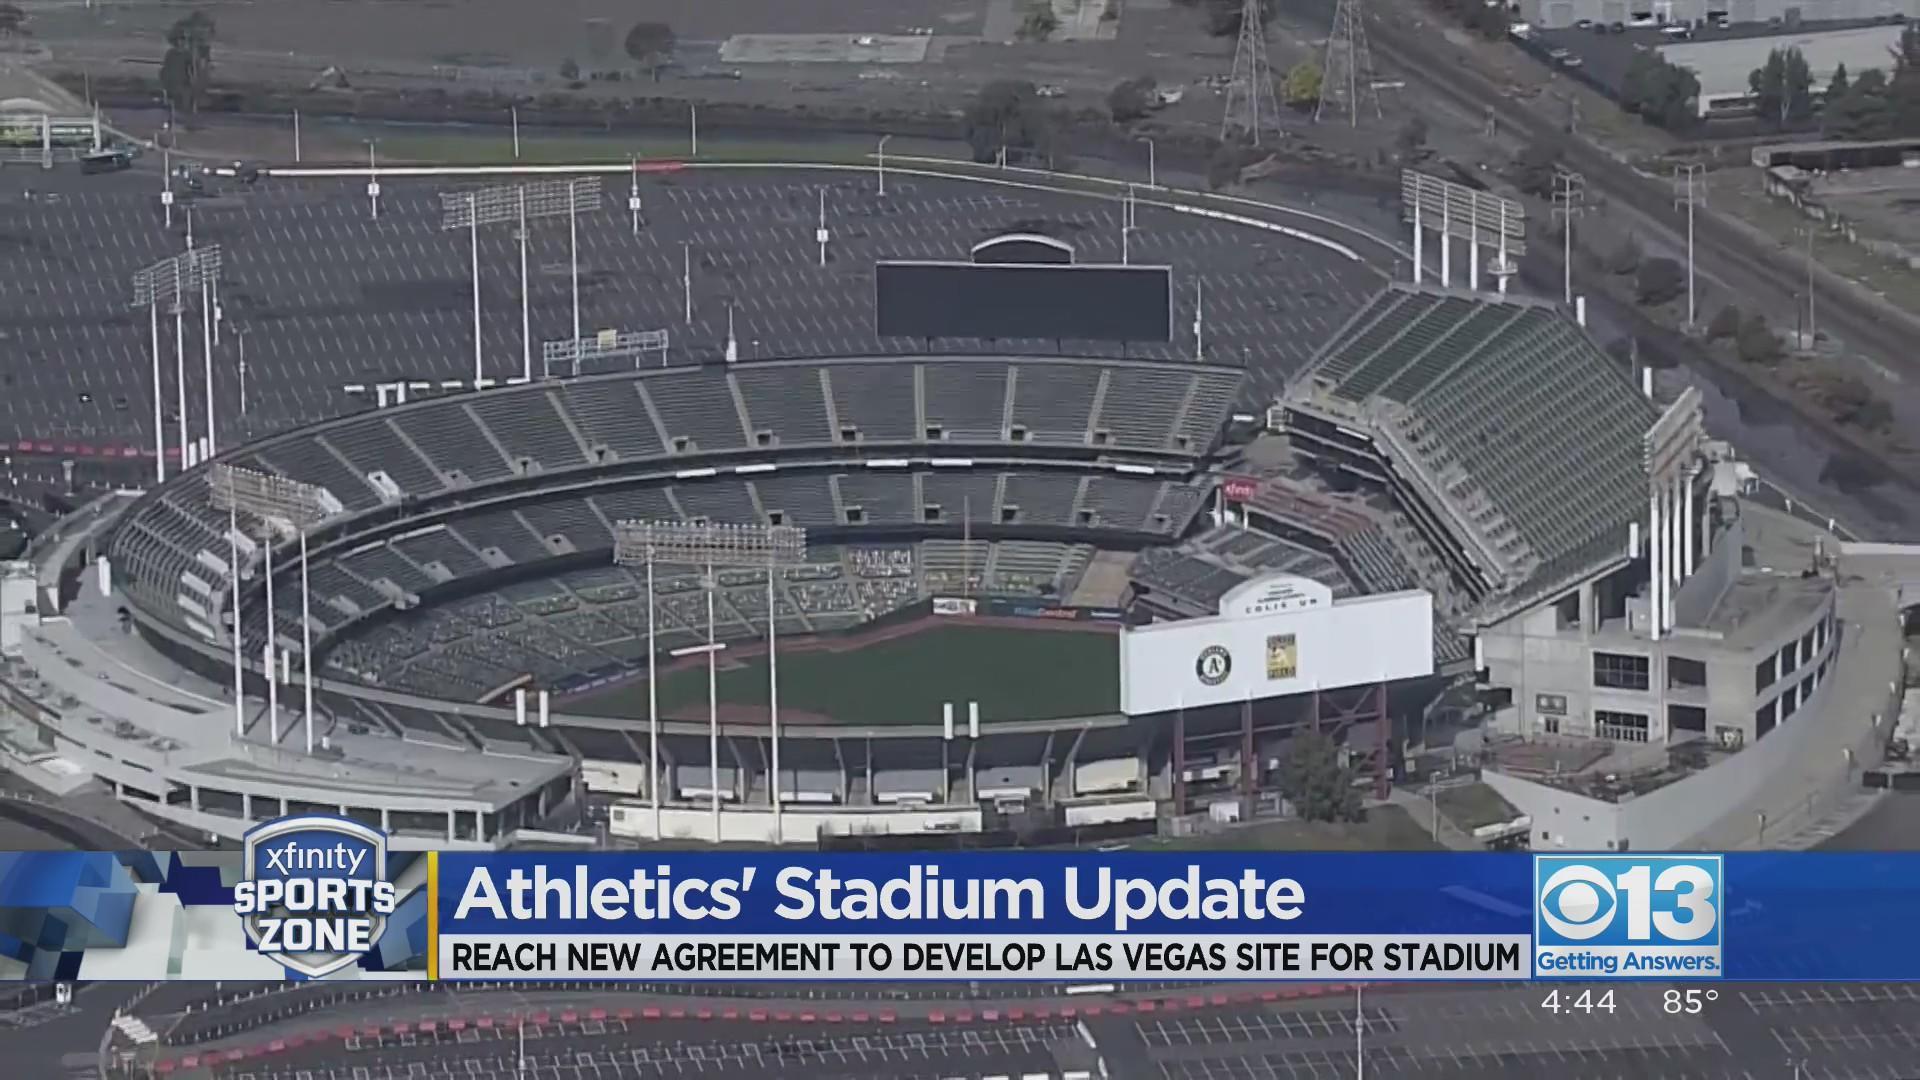 Athletics reach new agreement to develop Las Vegas site for new